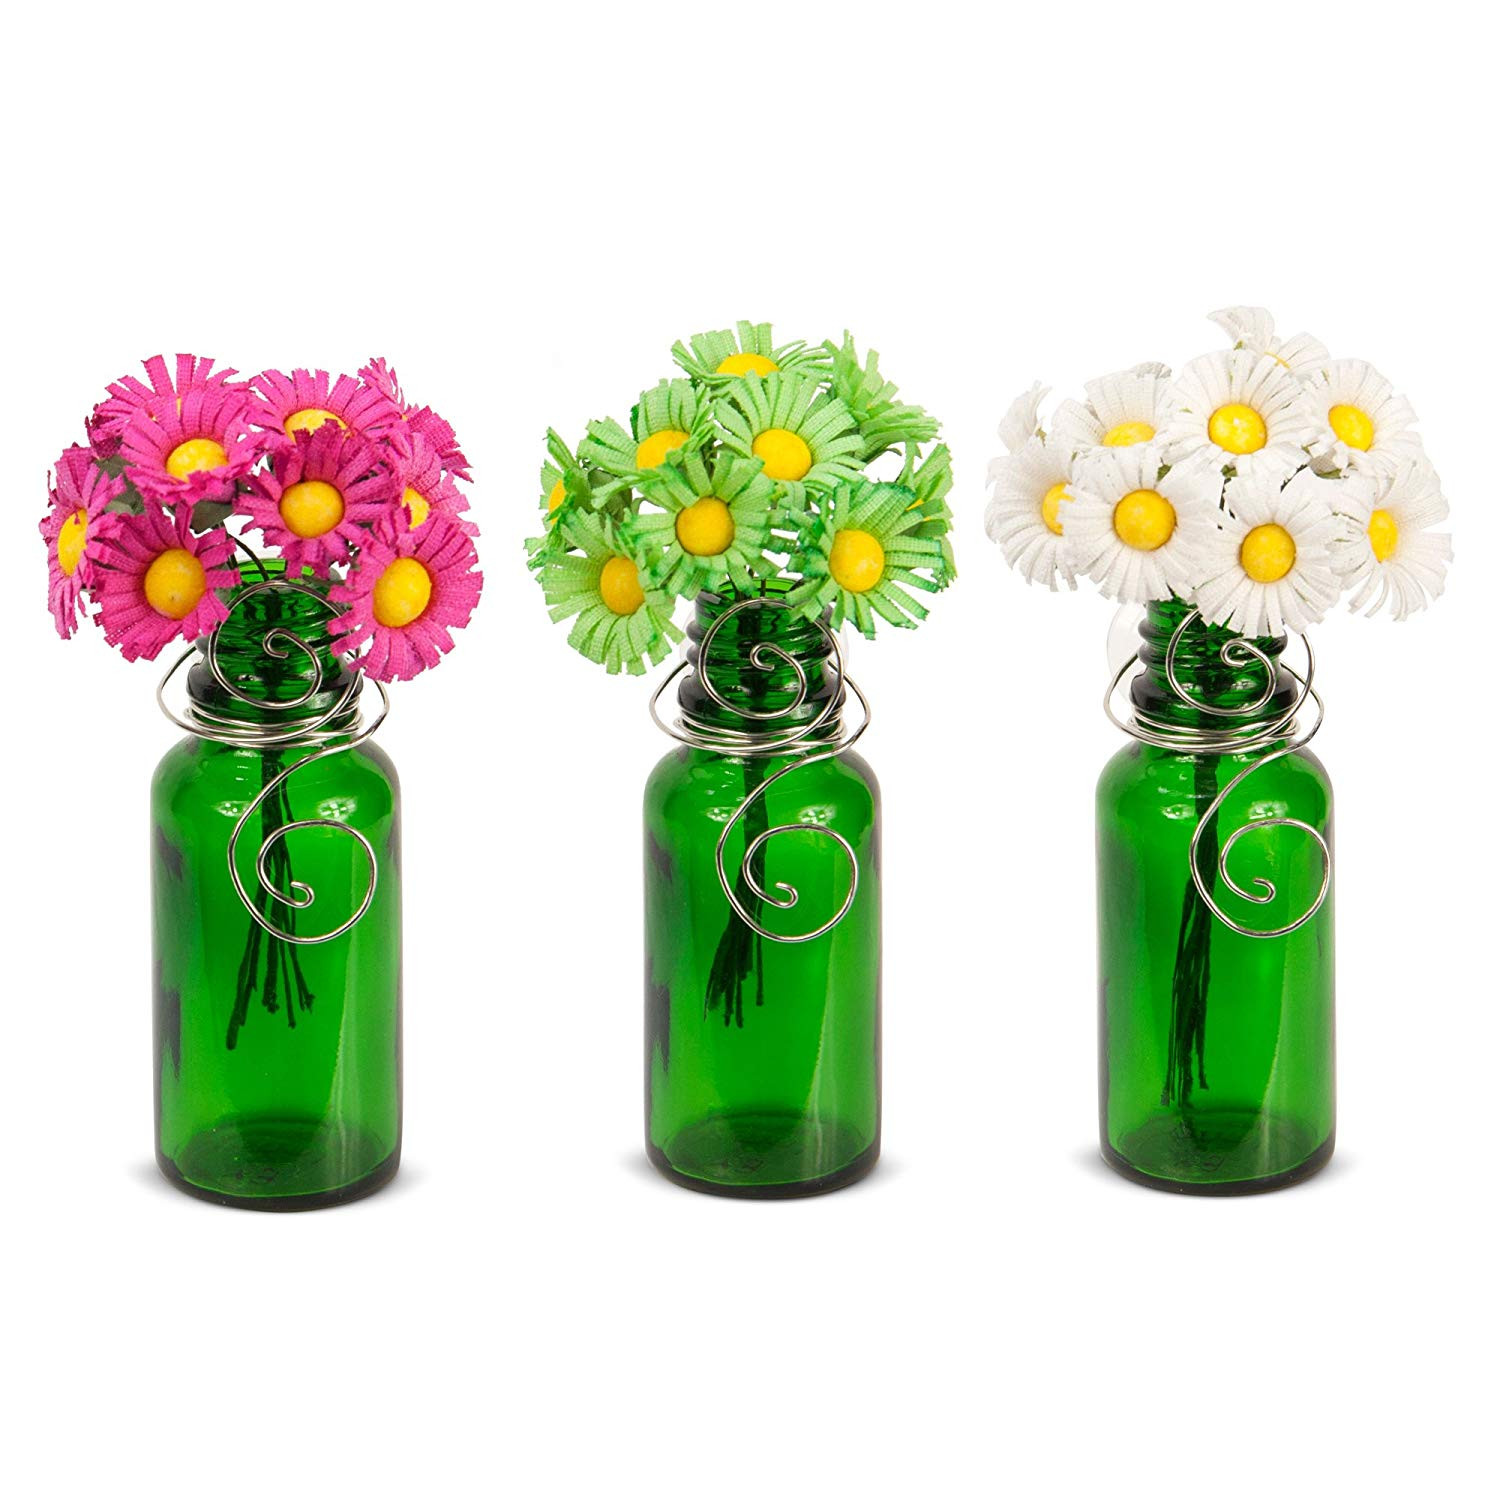 16 Famous Green Glass Bottle Vase 2022 free download green glass bottle vase of amazon com vazzini mini vase bouquet suction cup bud bottle with regard to amazon com vazzini mini vase bouquet suction cup bud bottle holder with flowers decorati